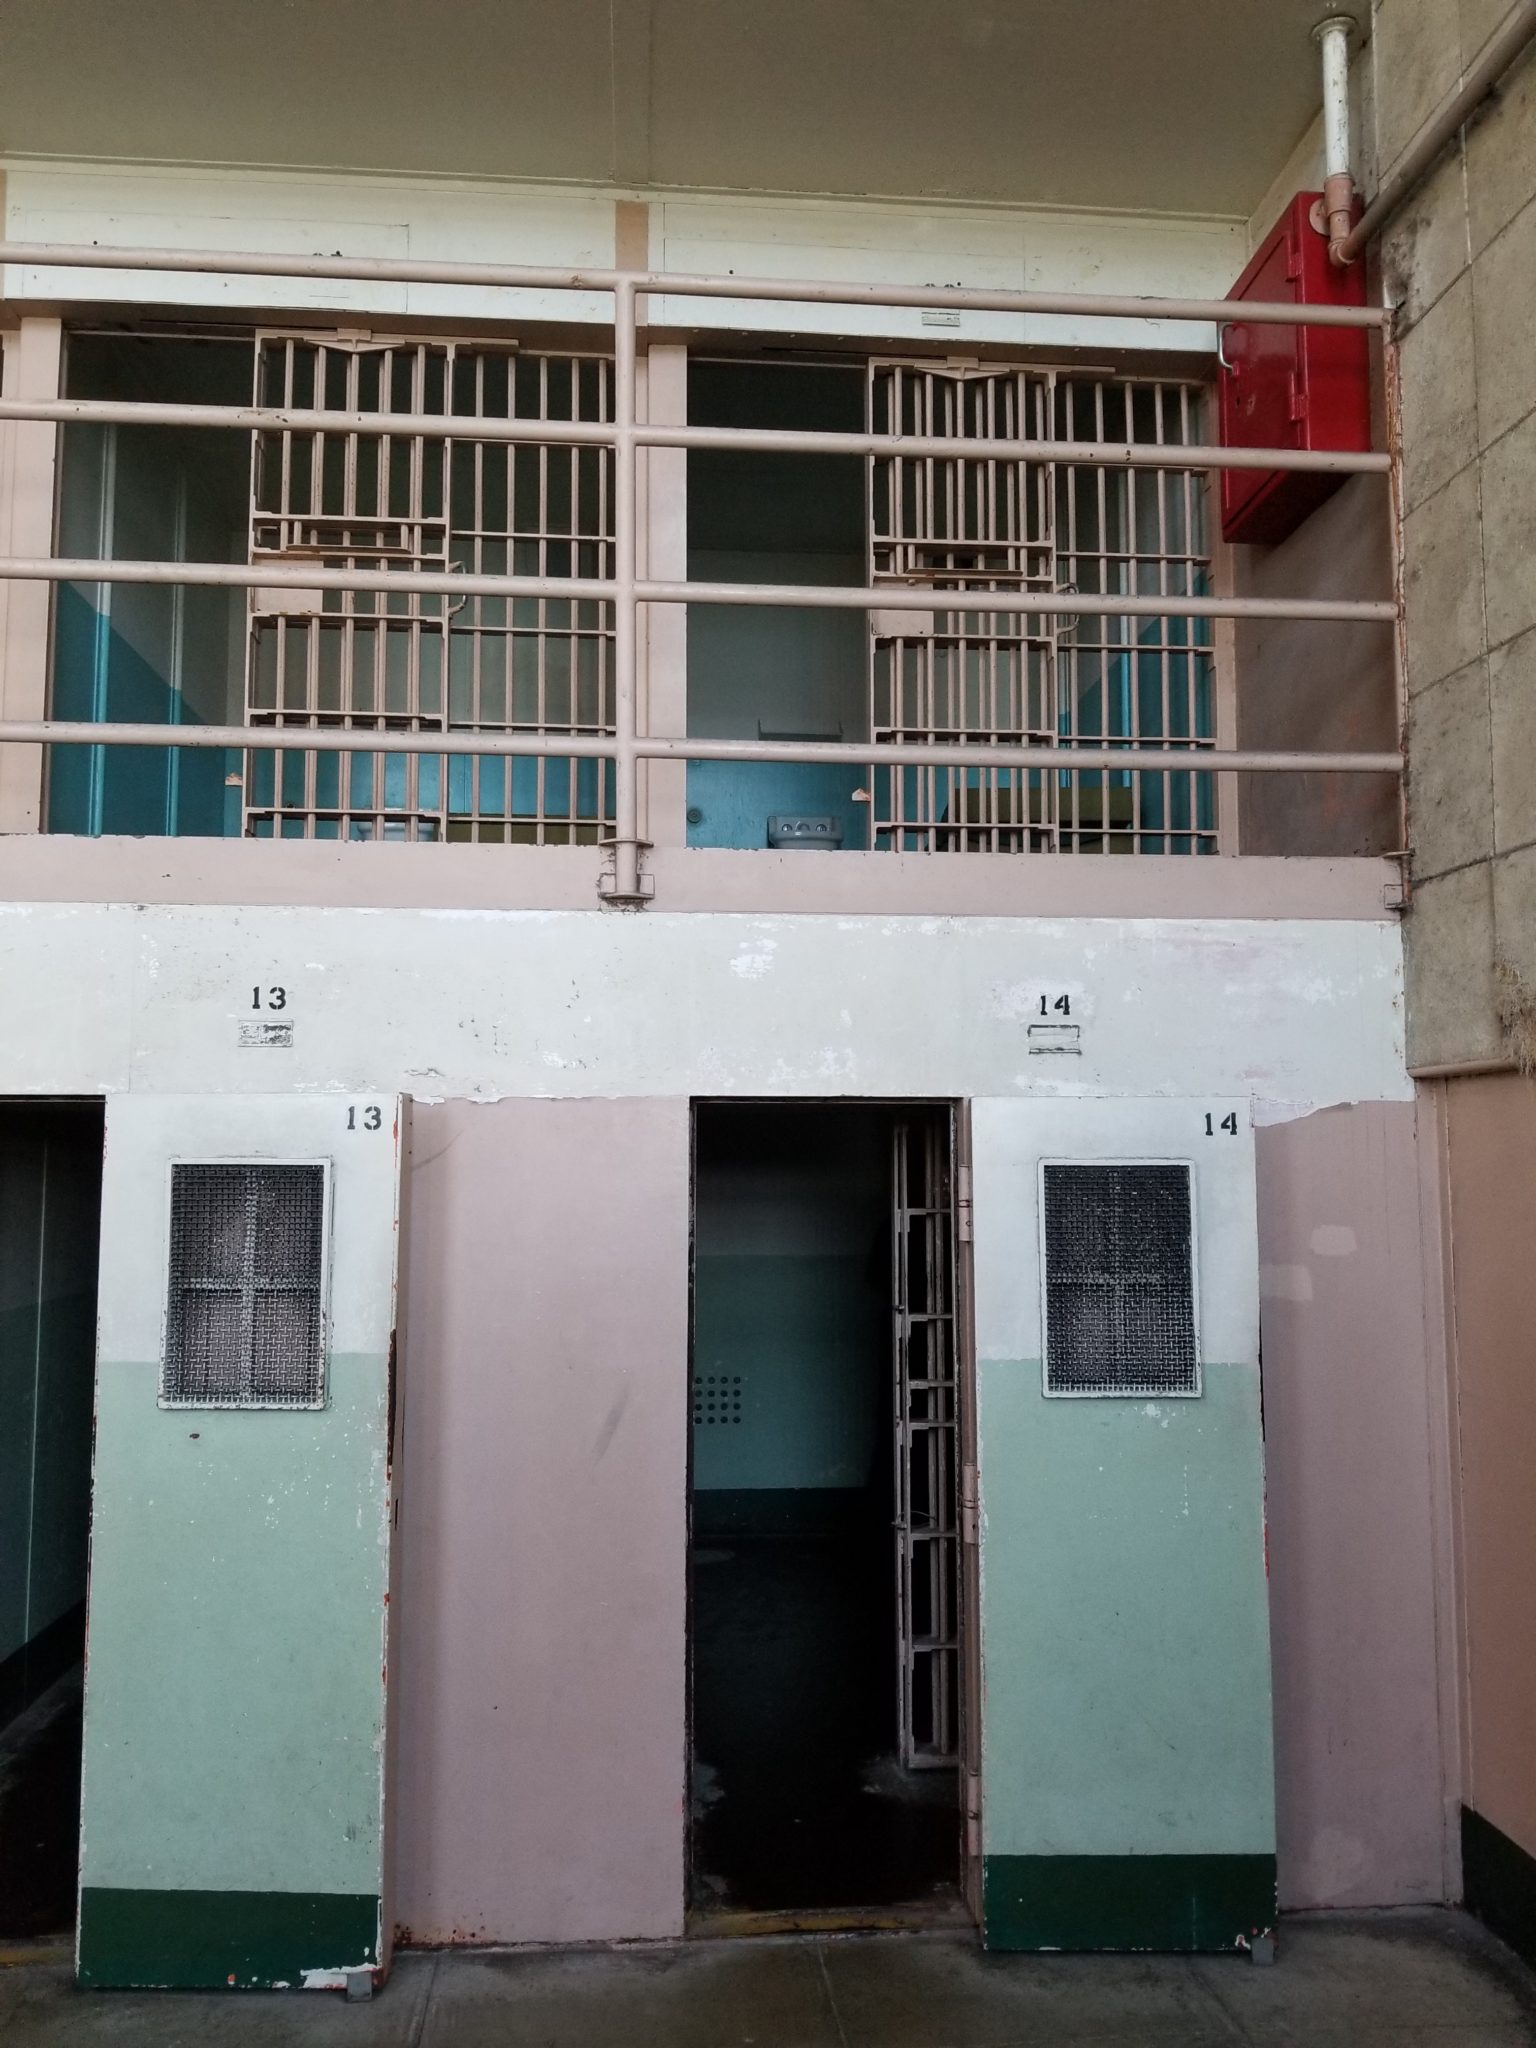 a jail cell with bars